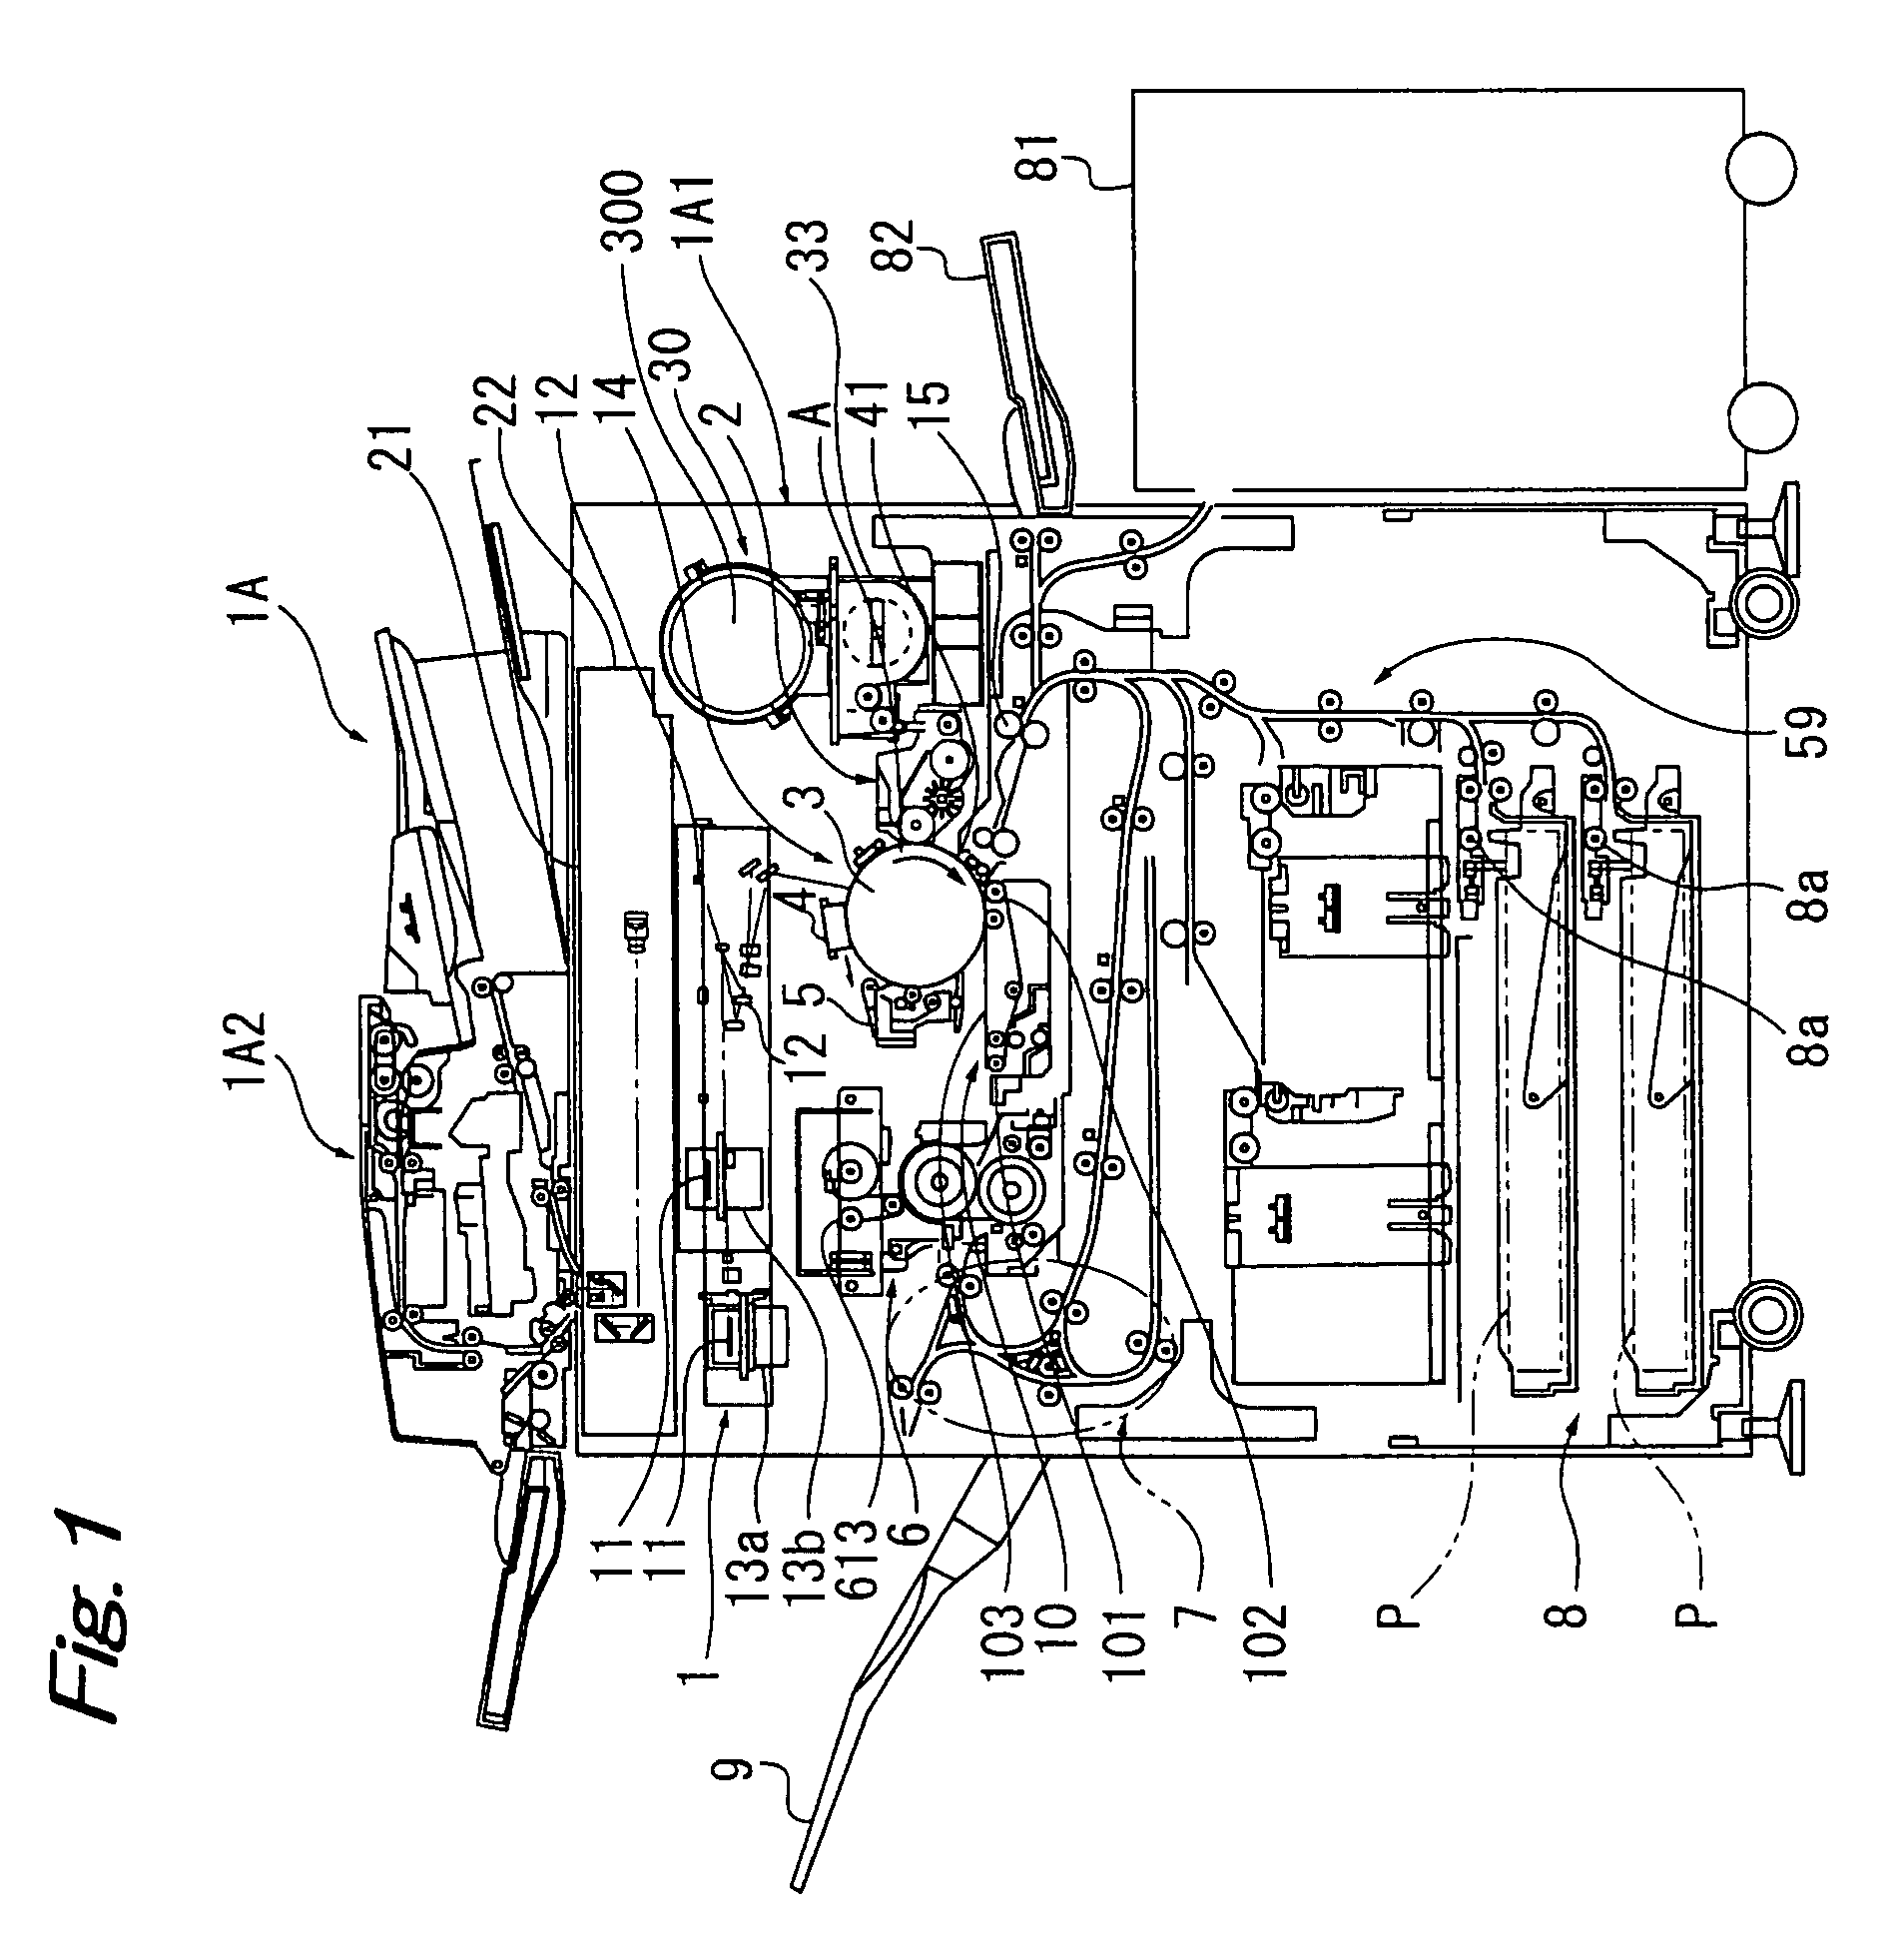 Toner container, toner feed device and image forming apparatus